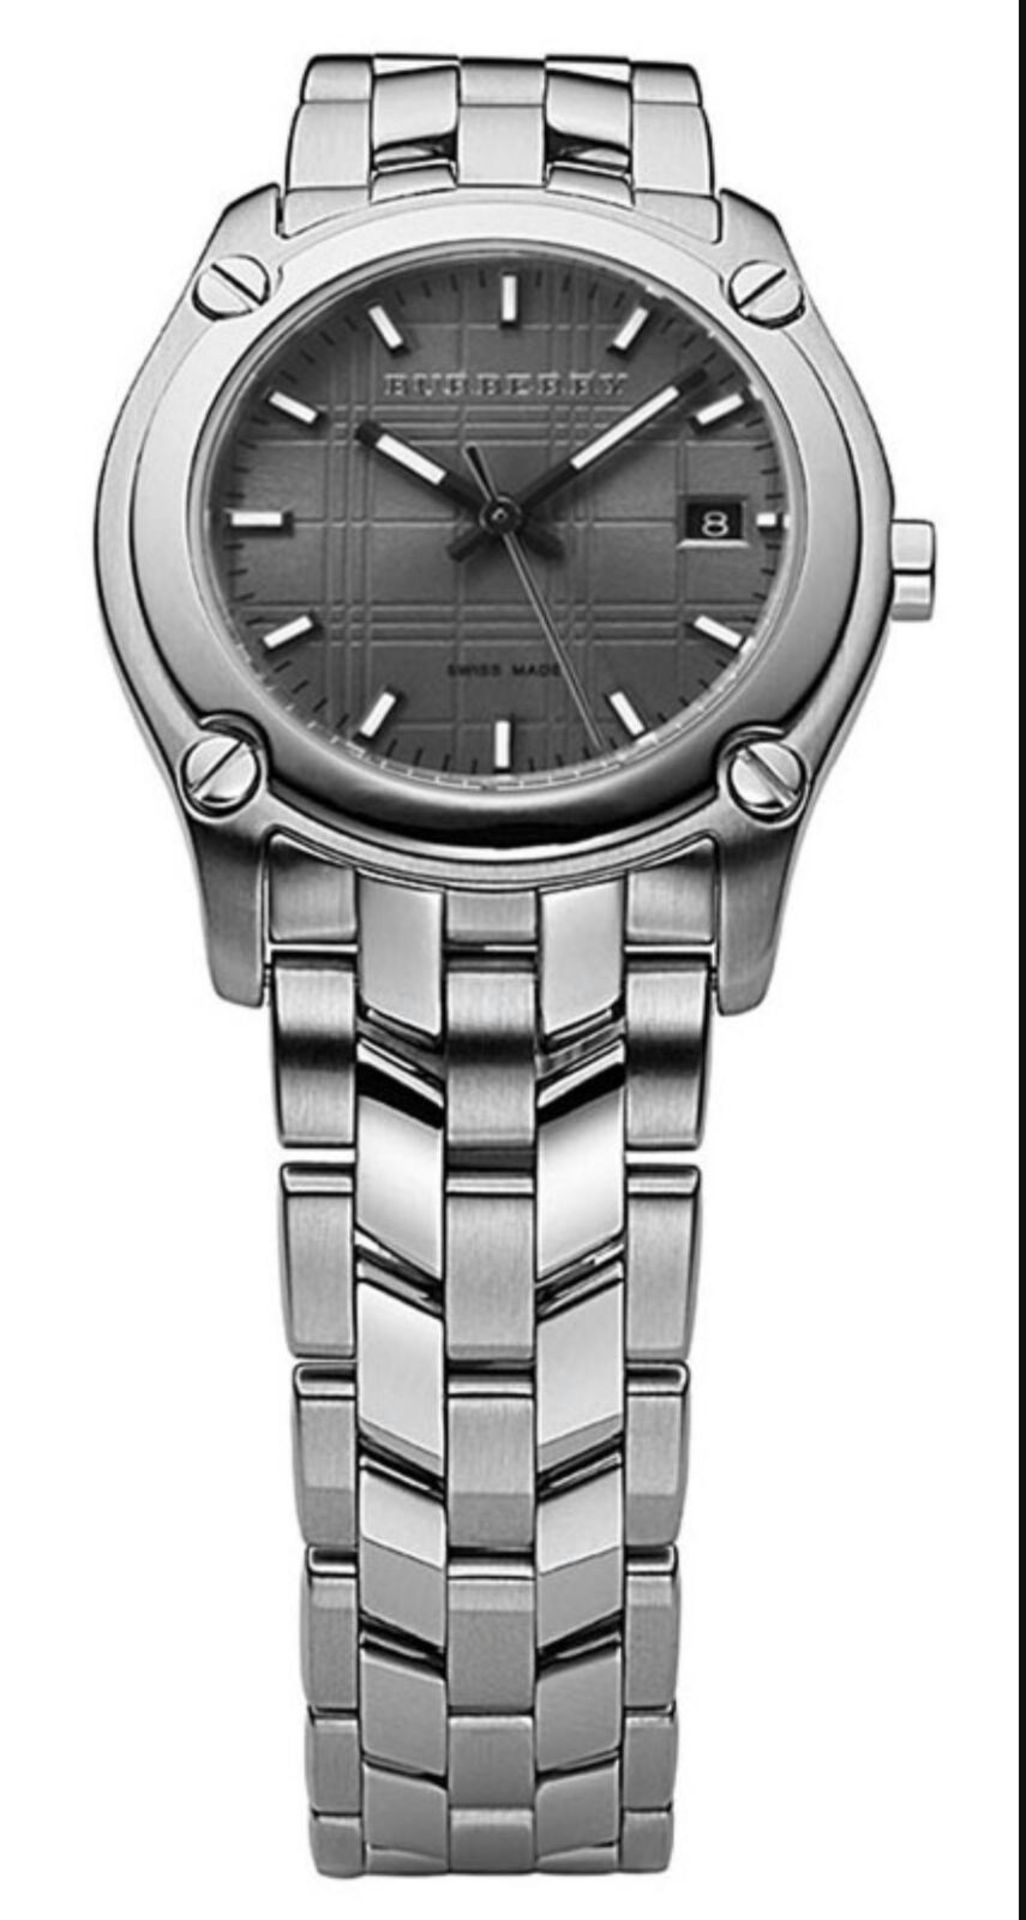 BRAND NEW LADIES BURBERRY WATCH, BU1851, COMPLETE WITH ORIGINAL BOX AND MANUAL - RRP £399